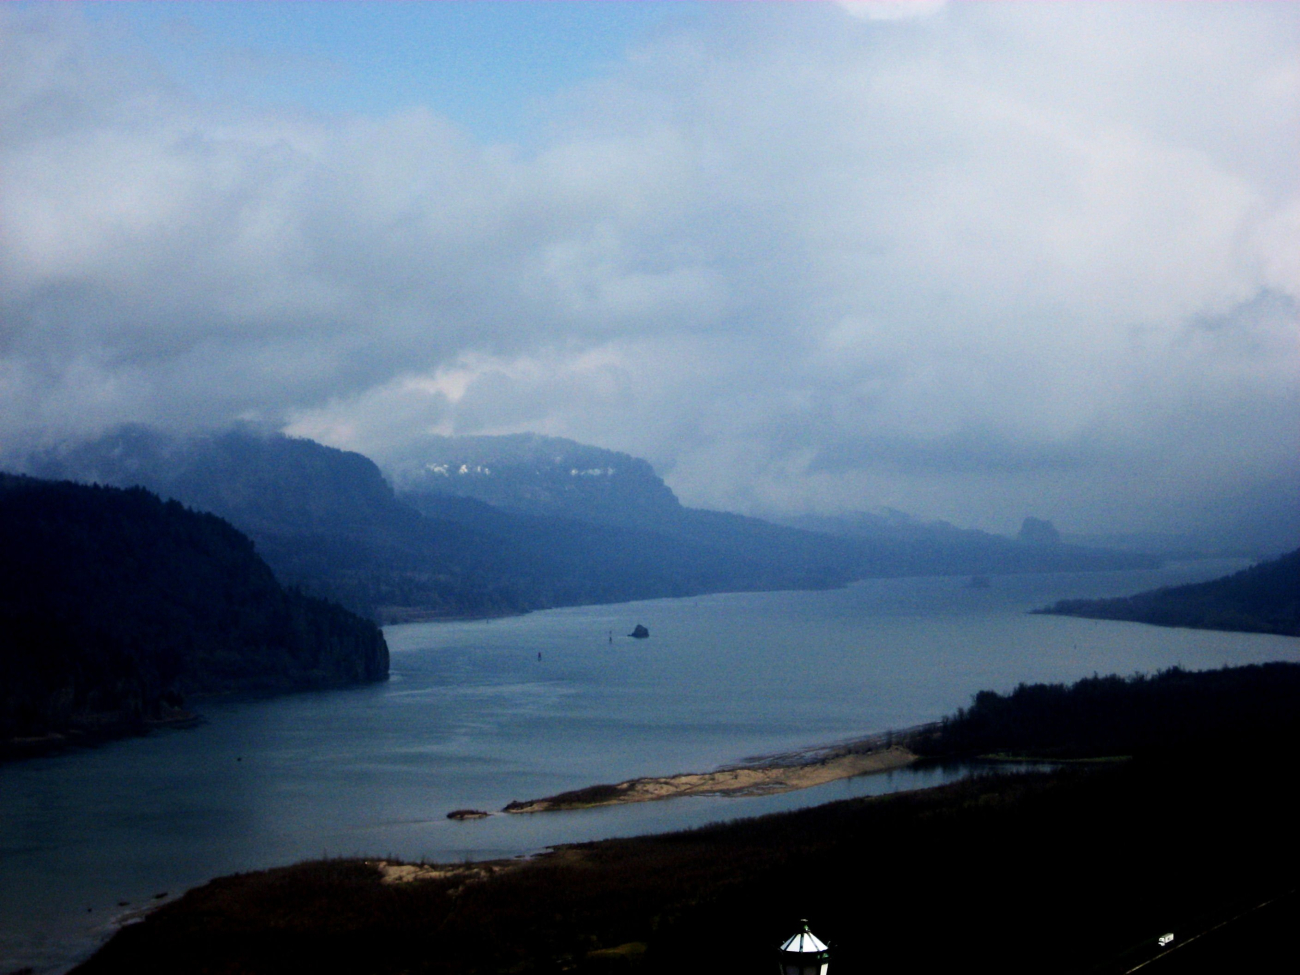 Looking up the Columbia River in the Columbia River Gorge